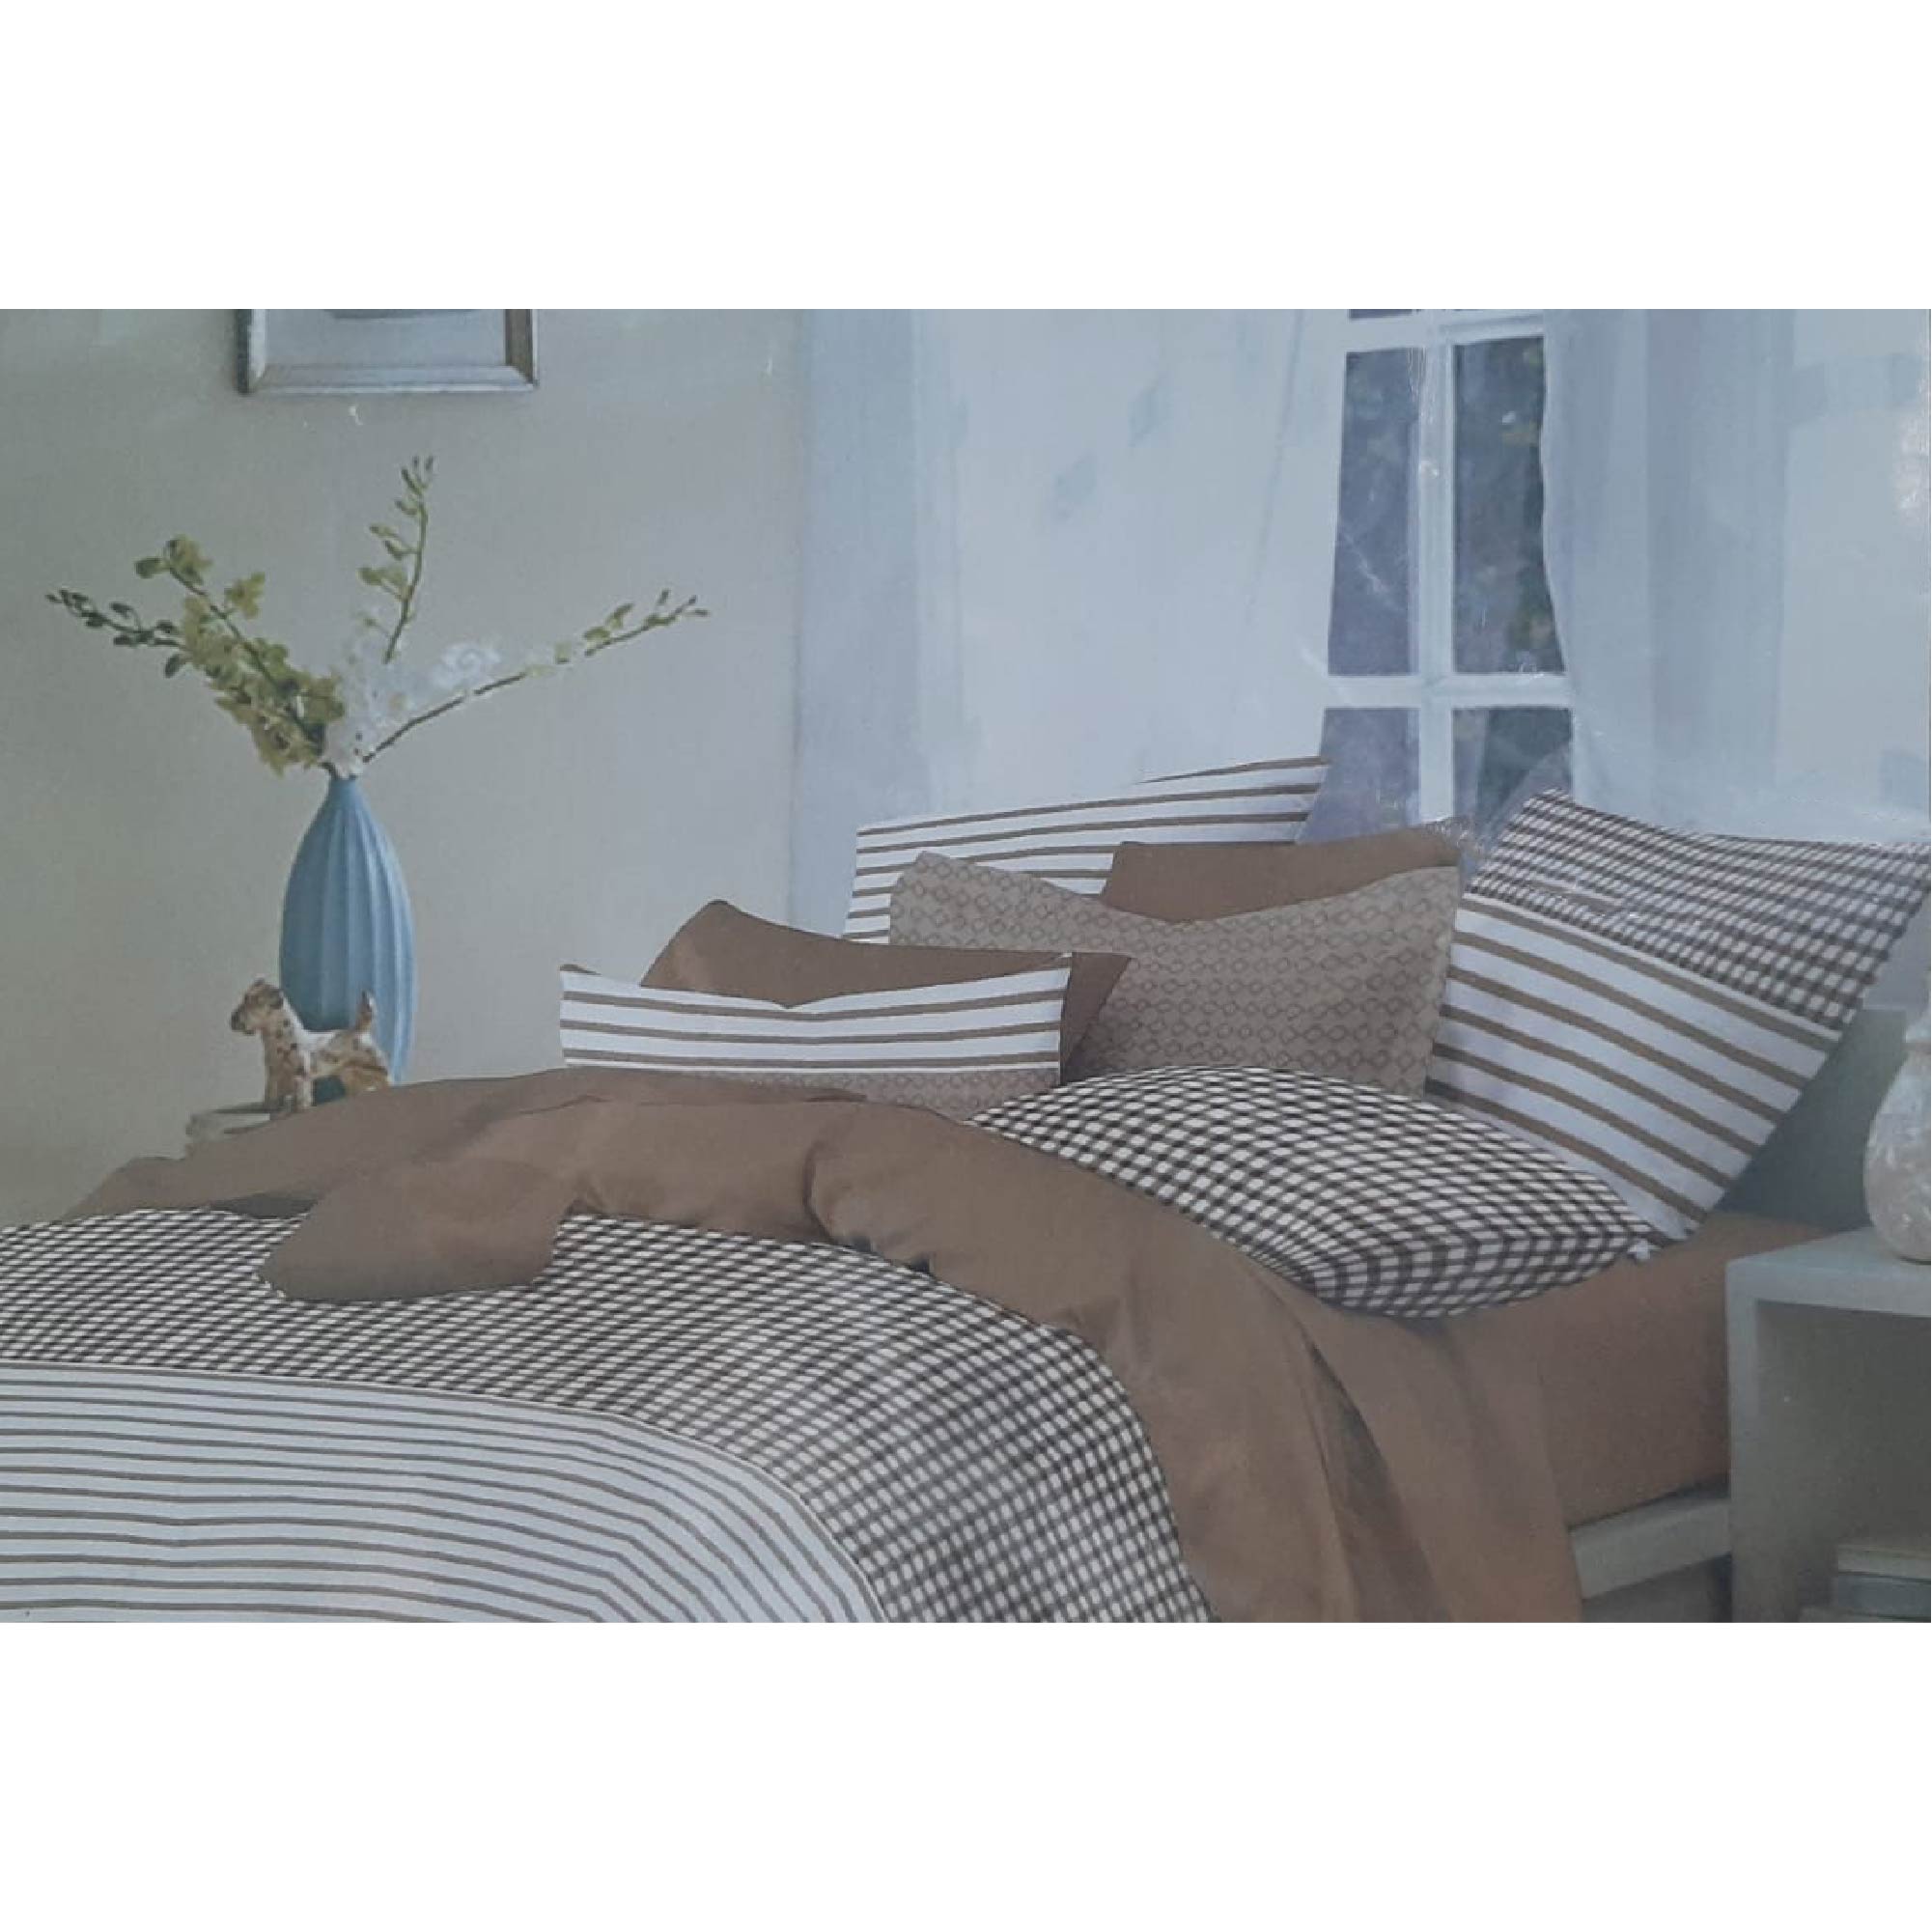 Windsor White/Begie/Brown Luxury Bed Linen Collection Single, WIN-8391WBBR